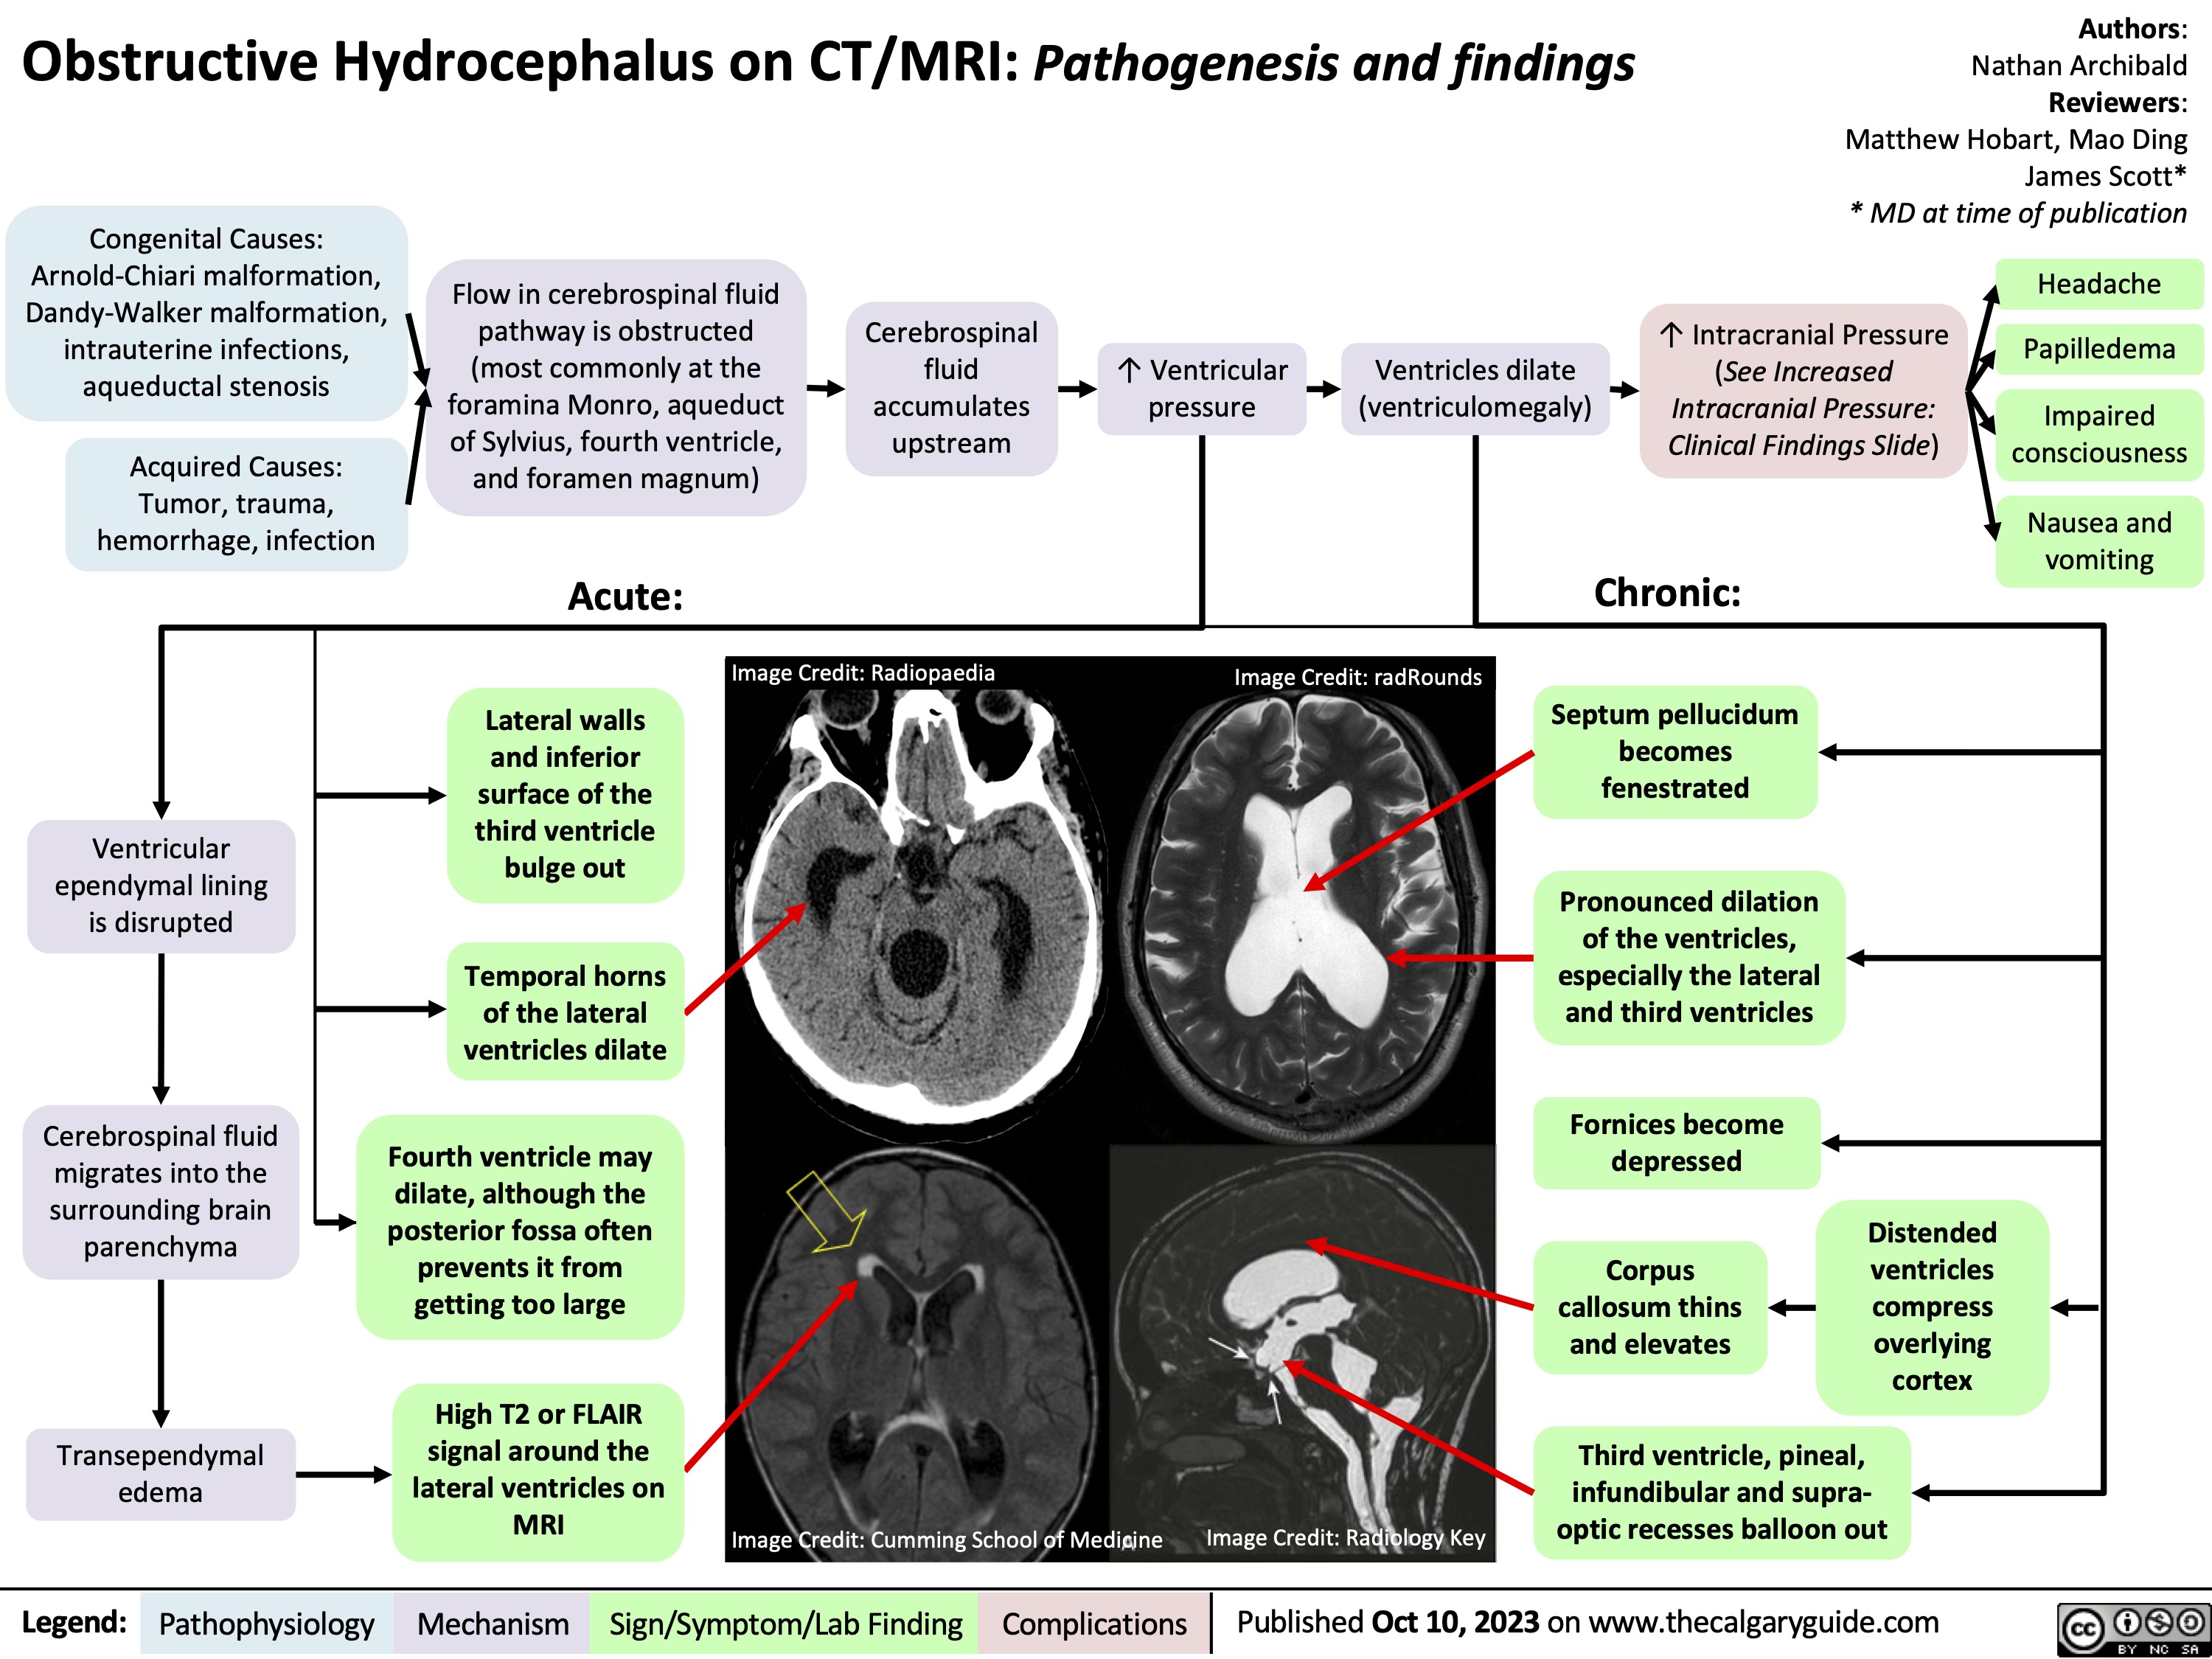 Obstructive Hydrocephalus on CT/MRI: Pathogenesis and findings
Authors: Nathan Archibald Reviewers: Matthew Hobart, Mao Ding James Scott* * MD at time of publication
 Congenital Causes: Arnold-Chiari malformation, Dandy-Walker malformation, intrauterine infections, aqueductal stenosis
Acquired Causes: Tumor, trauma, hemorrhage, infection
Flow in cerebrospinal fluid pathway is obstructed (most commonly at the foramina Monro, aqueduct of Sylvius, fourth ventricle, and foramen magnum)
Acute:
Lateral walls and inferior surface of the third ventricle bulge out
Temporal horns Temporal horns
of the lateral of the lateral
ventricles dilate ventricles dilate
Cerebrospinal fluid accumulates upstream
↑ Ventricular pressure
Ventricles dilate (ventriculomegaly)
↑ Intracranial Pressure (See Increased Intracranial Pressure: Clinical Findings Slide)
Headache Papilledema
Impaired consciousness
Nausea and vomiting
               Image Credit: Radiopaedia
Image Credit: radRounds
        Ventricular ependymal lining is disrupted
Cerebrospinal fluid migrates into the surrounding brain parenchyma
Transependymal edema
Fourth ventricle may Fourth ventricle may
Chronic:
Septum pellucidum becomes fenestrated
Pronounced dilation of the ventricles, especially the lateral and third ventricles
Fornices become depressed
Corpus callosum thins and elevates
               dilate, although the dilate, although the
 posterior fossa often posterior fossa often
Distended ventricles compress overlying cortex
 prevents it from prevents it from
 getting too large getting too large
     High T2 or FLAIR High T2 or FLAIR
signal around the signal around the
lateral ventricles on lateral ventricles on
MRI MRI
Image Credit: Cumming School of Medicine
Image Credit: Radiology Key
Third ventricle, pineal, infundibular and supra- optic recesses balloon out
   Legend:
 Pathophysiology
Mechanism
Sign/Symptom/Lab Finding
 Complications
Published Oct 10, 2023 on www.thecalgaryguide.com
    